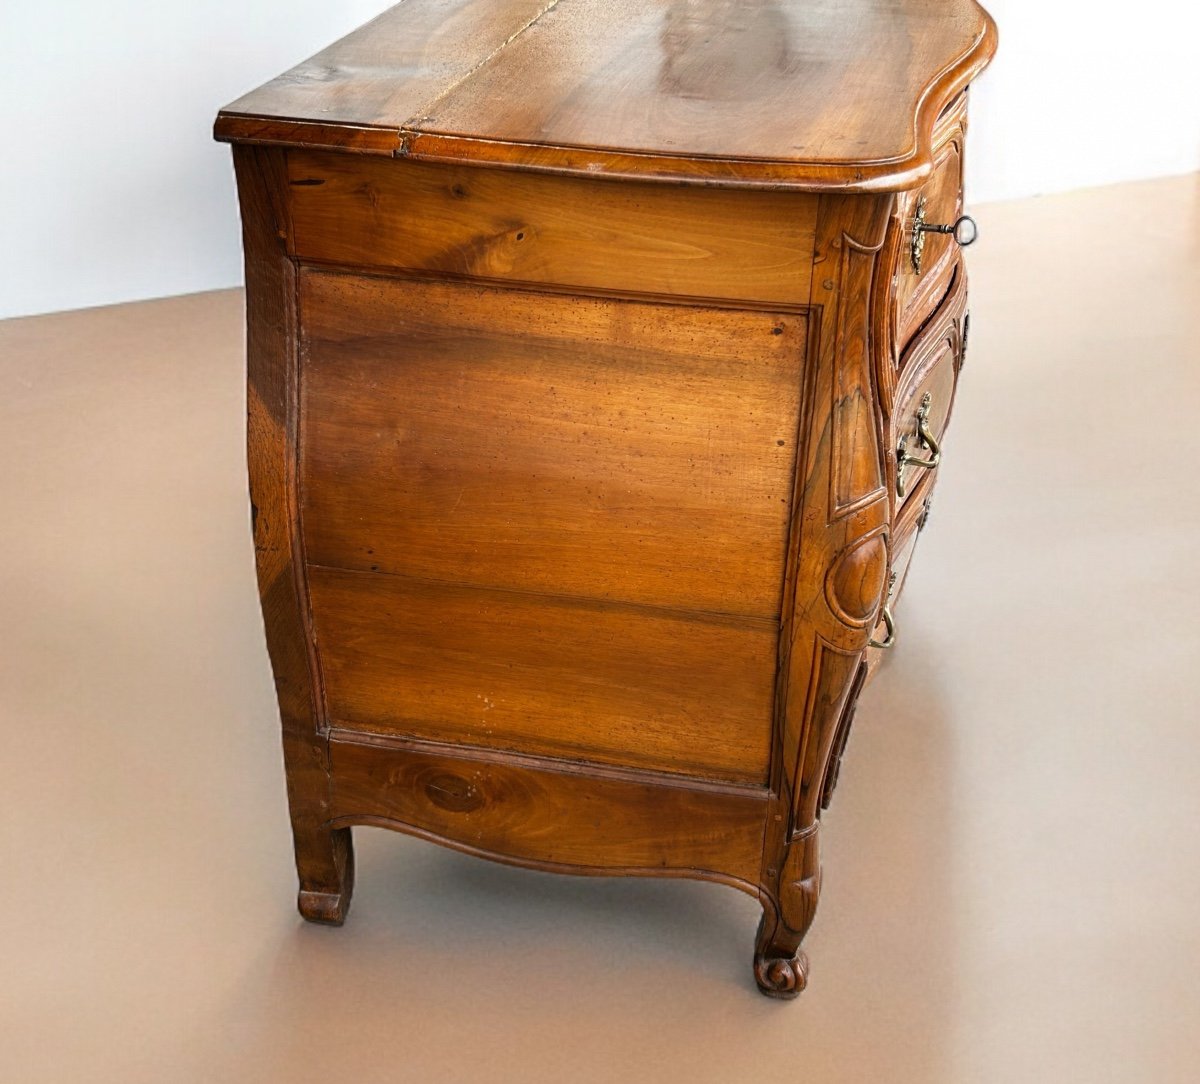 Louis XV Tomb Commode In Walnut From The 18th Century-photo-4